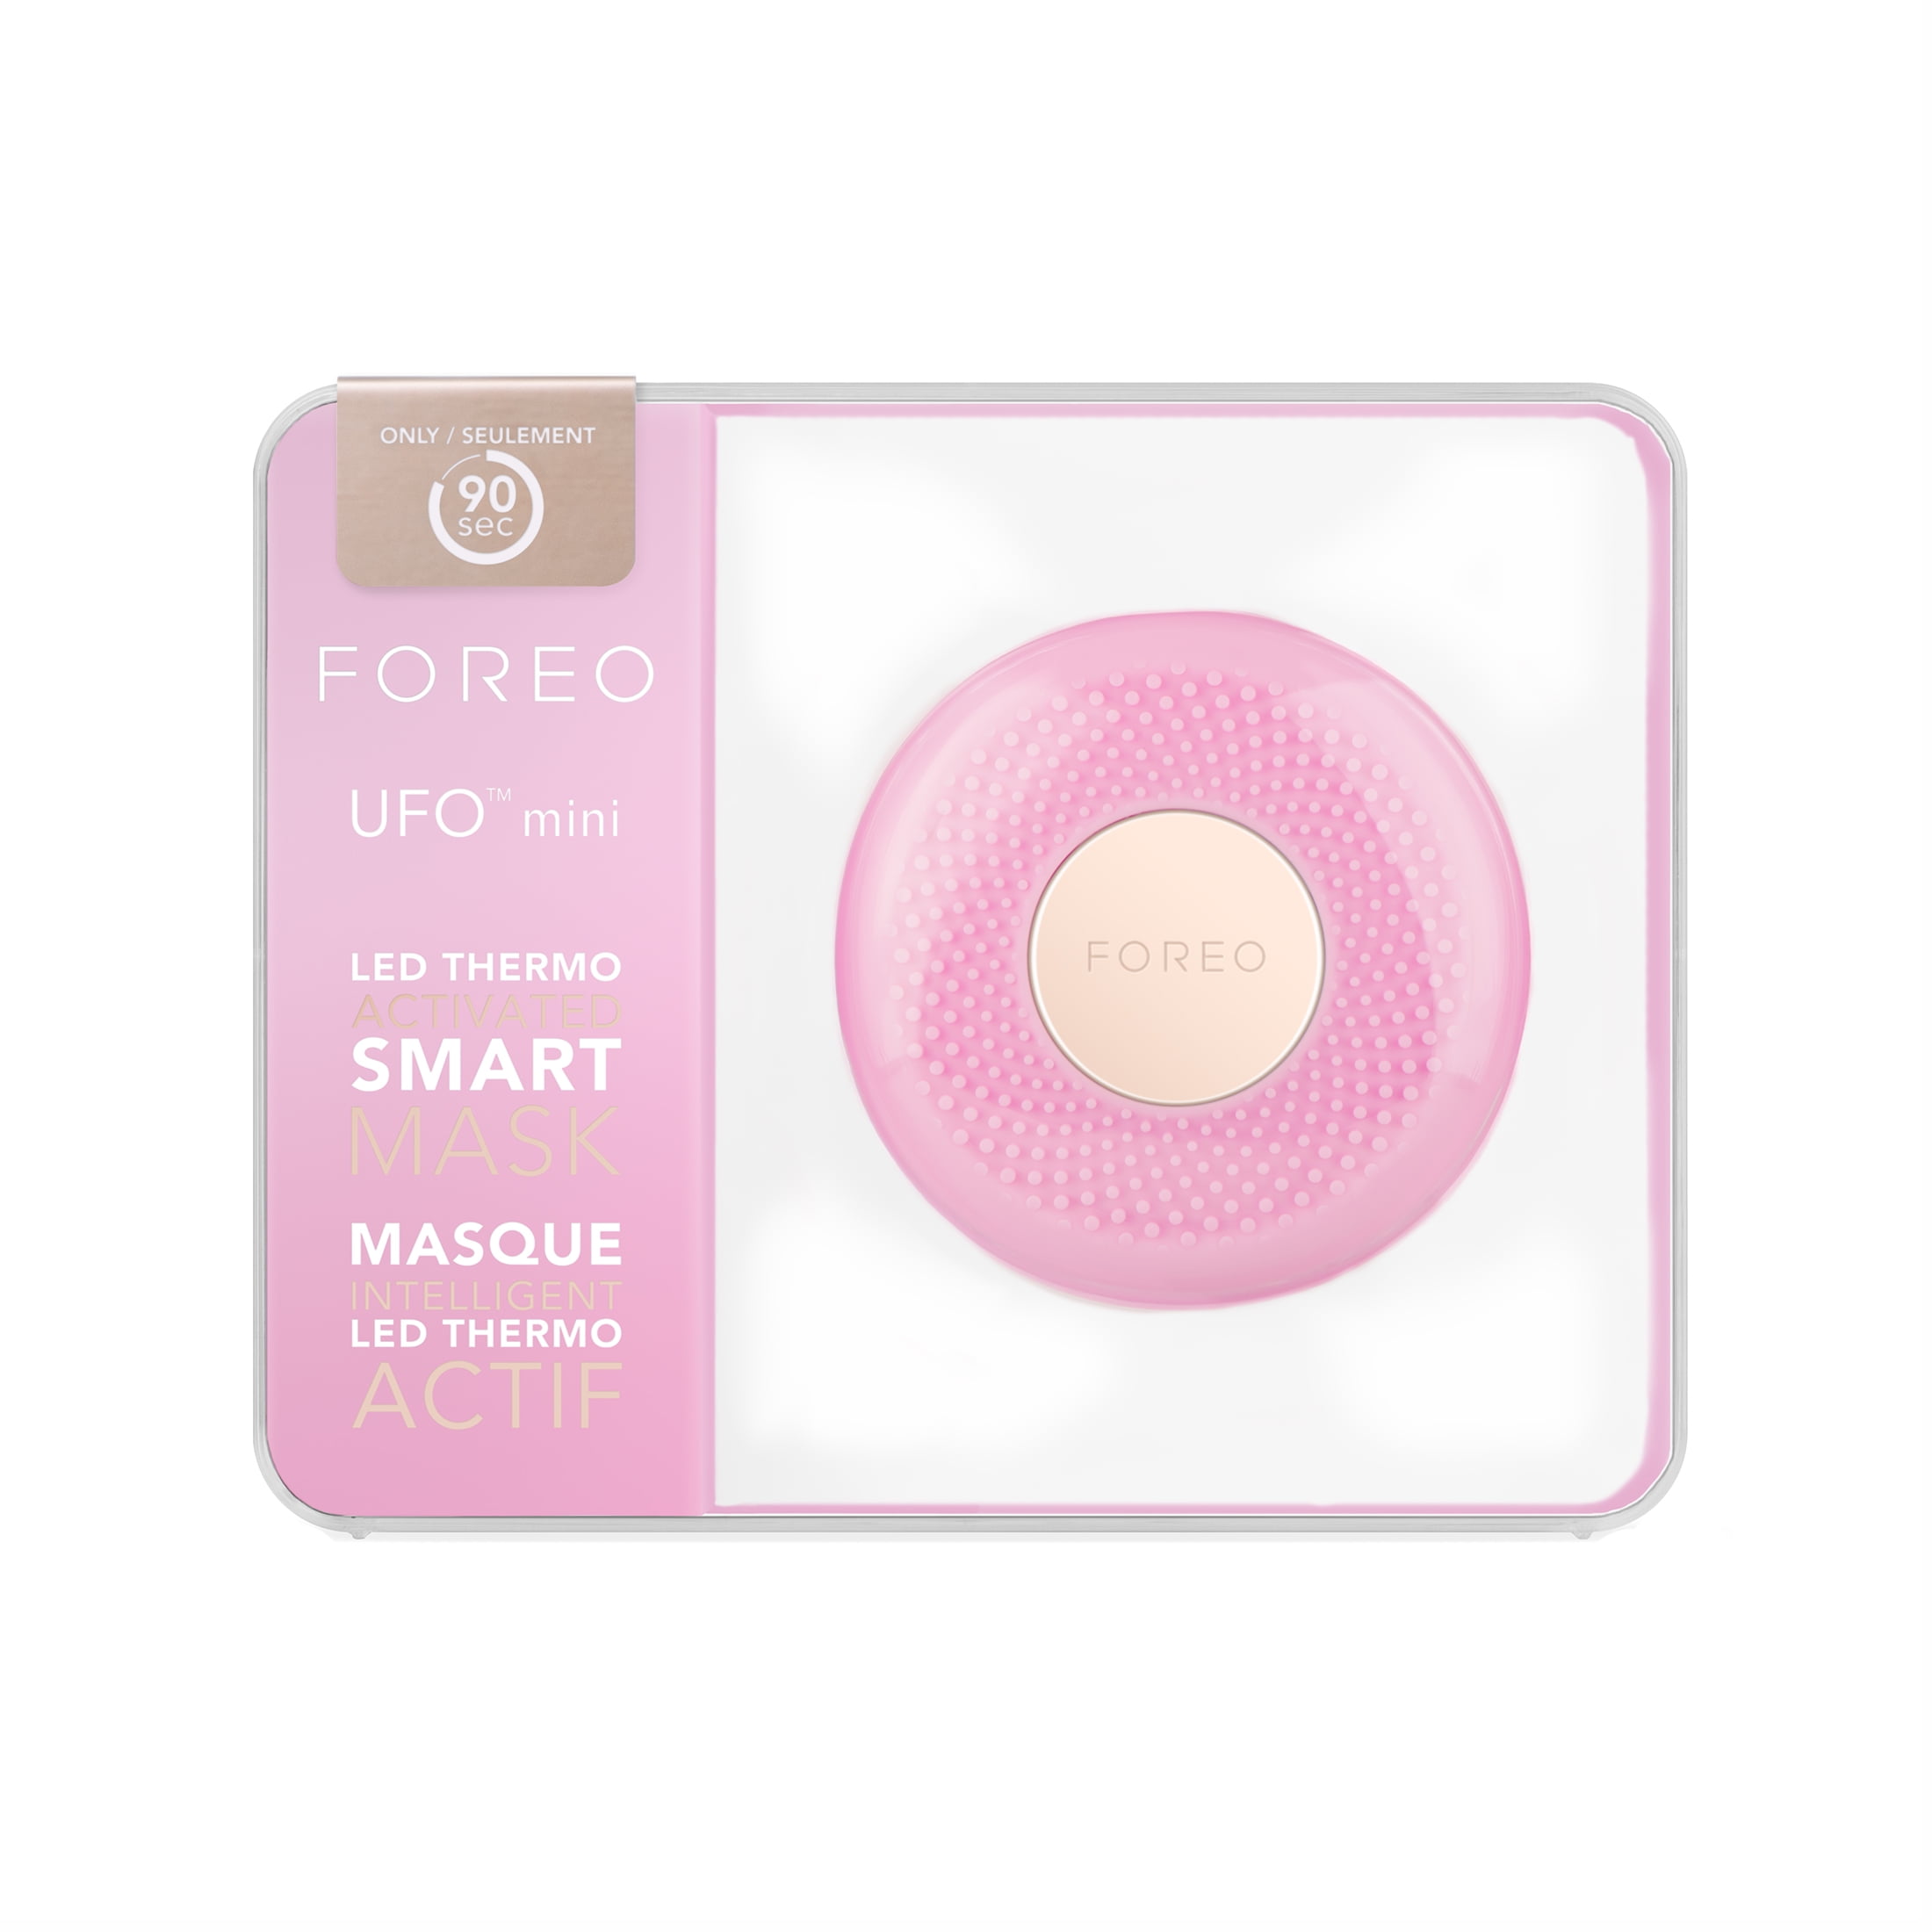 Care Exfoliator, Foreo and Facial Skin Pink UFO Massager Cleansing Mini Brush